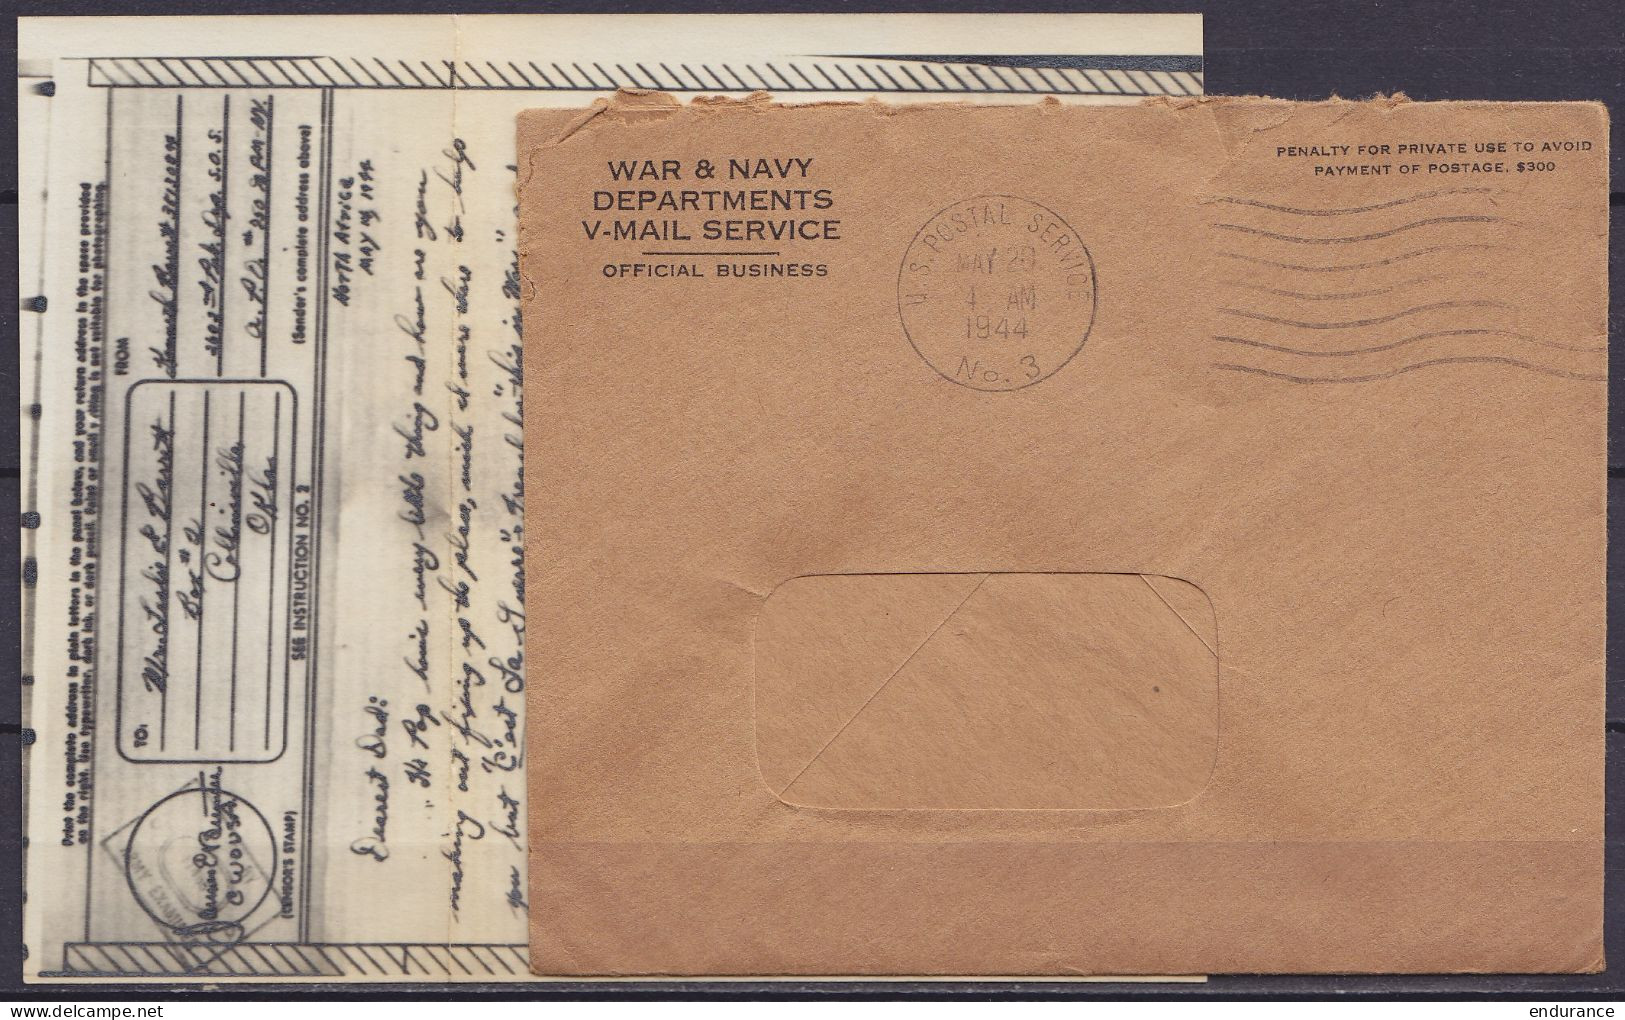 USA - V-MAIL WAR & NAVY DEPARTMENT Flam. "U.S. POSTAL SERVICE /MAY 20 1944" Pour COLINSVILLE Oklahoma - Lettres & Documents